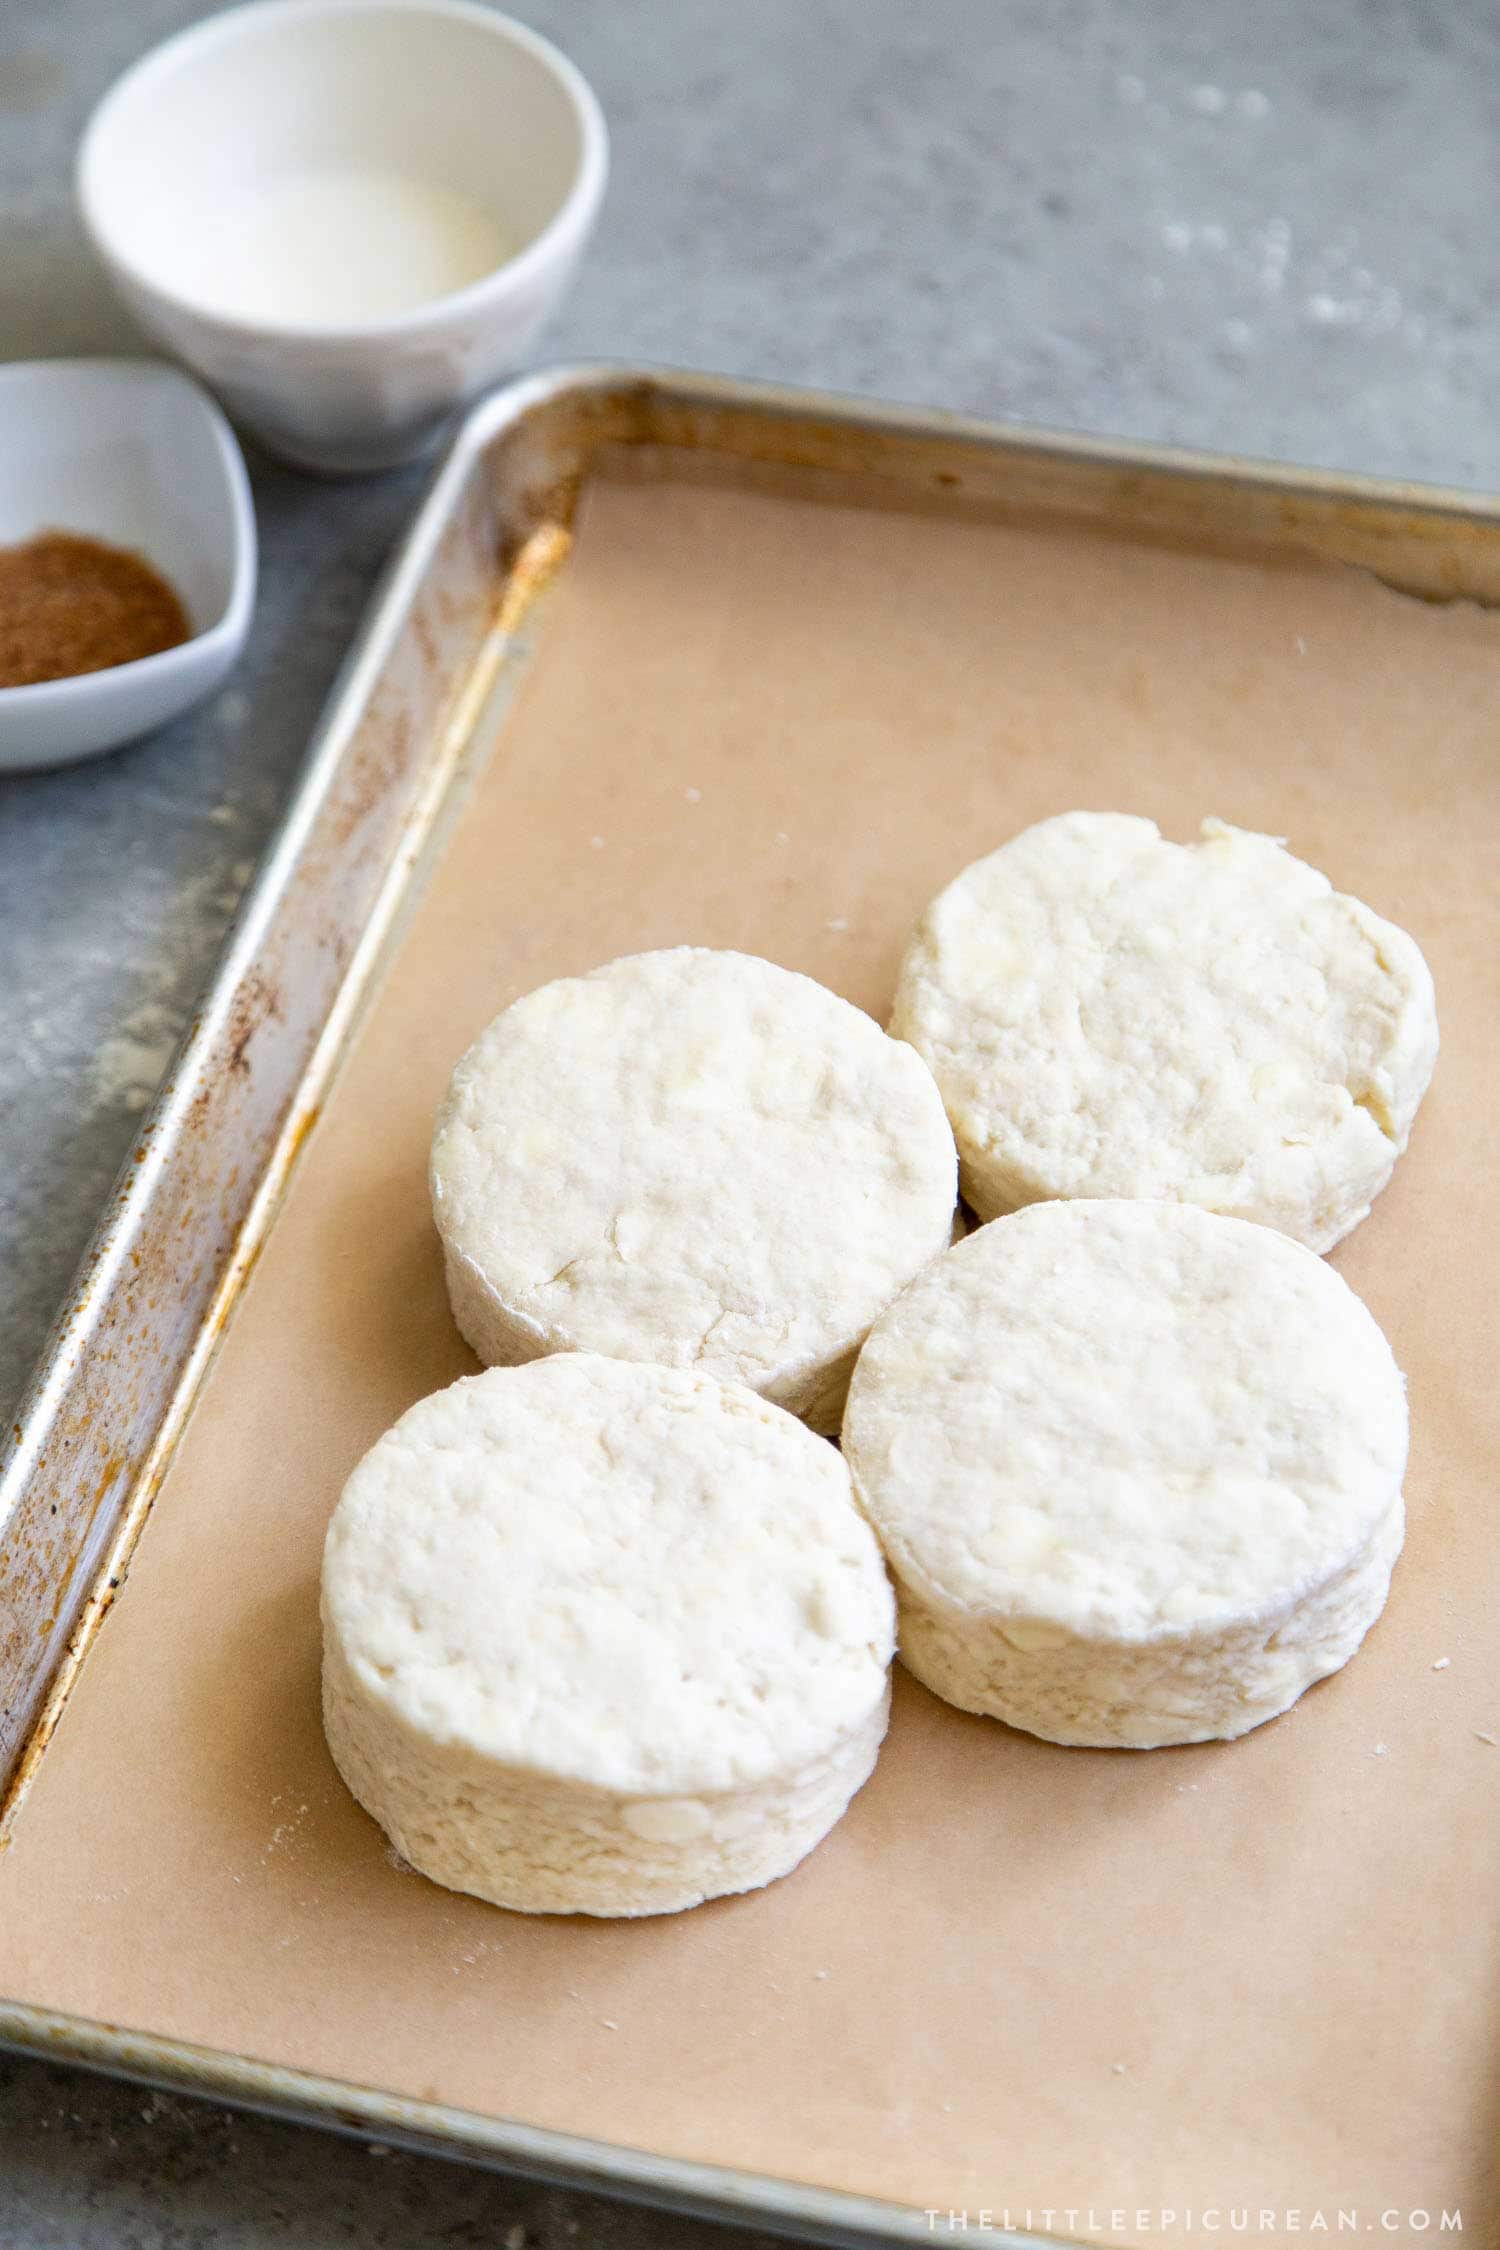 These coconut shortcake biscuits are baked touching each other. This allows the biscuits to rise more during baking. 